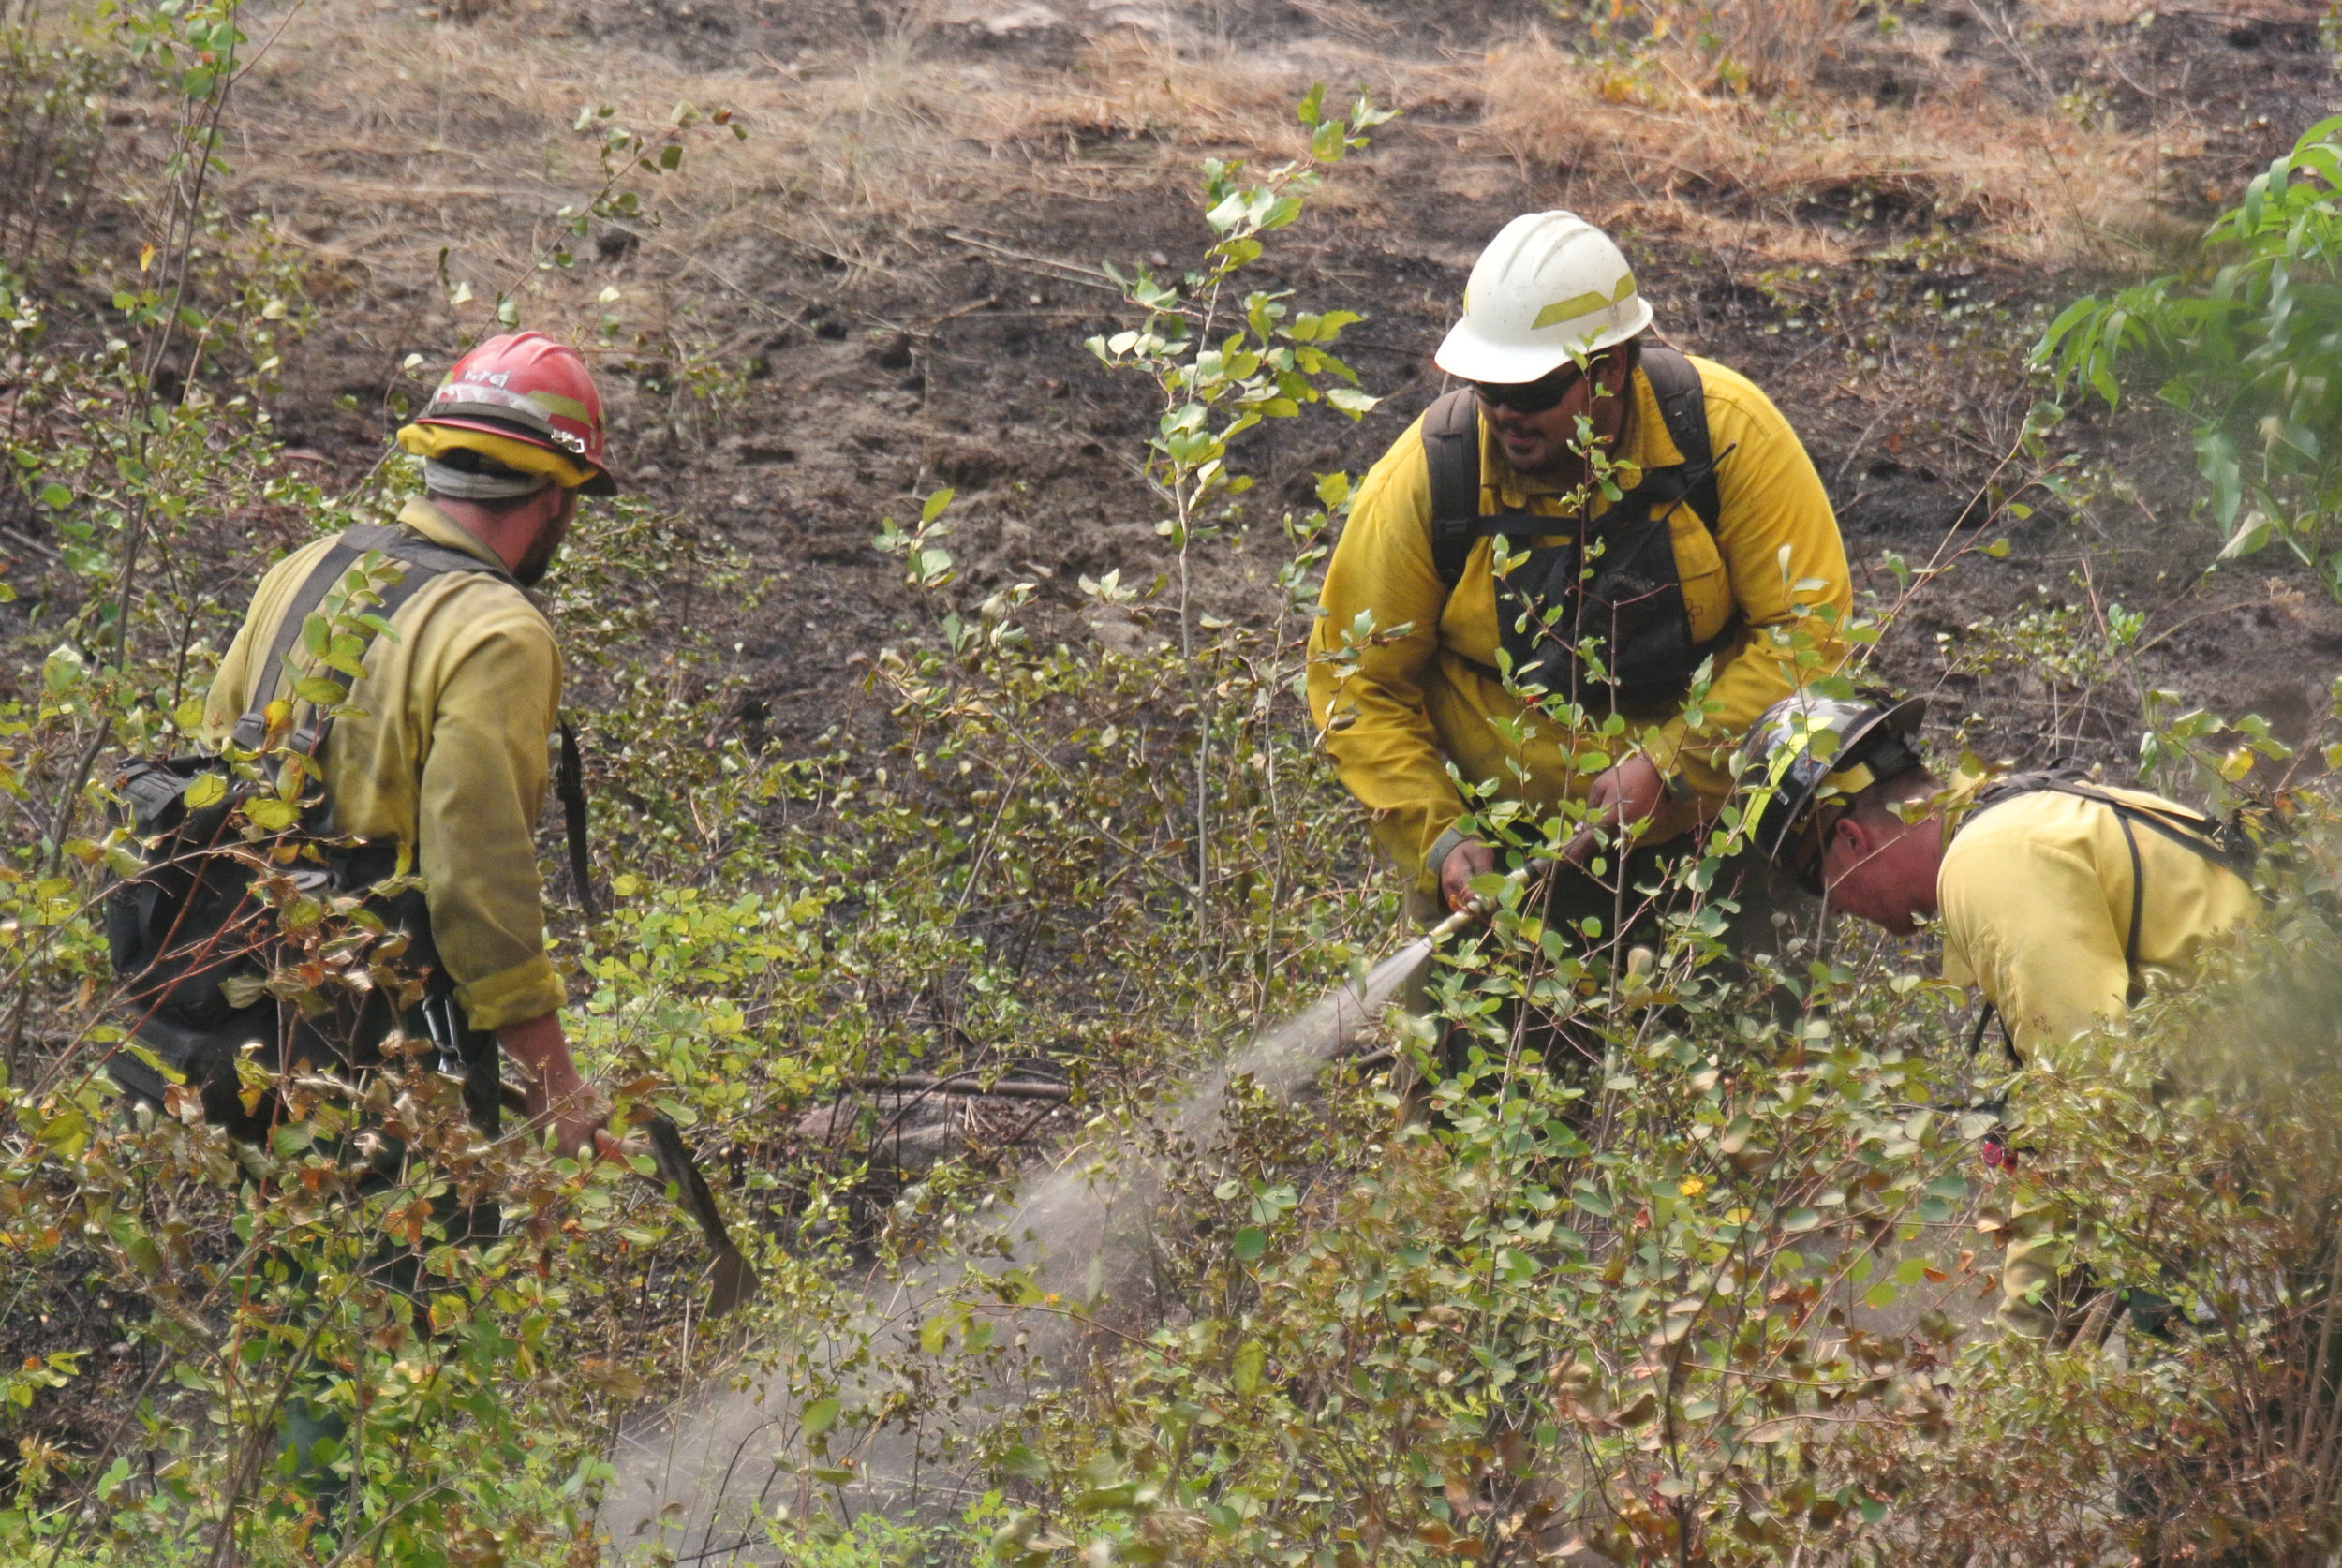  Fire Fighters secure a residential property partially burned by the Okanogan Complex fire on Salmon Creek Road, Sunday August 23, 2015. Due to the size and speed of the Okanogan Complex Fire, Firefighters often arrive after most fire damage is done,